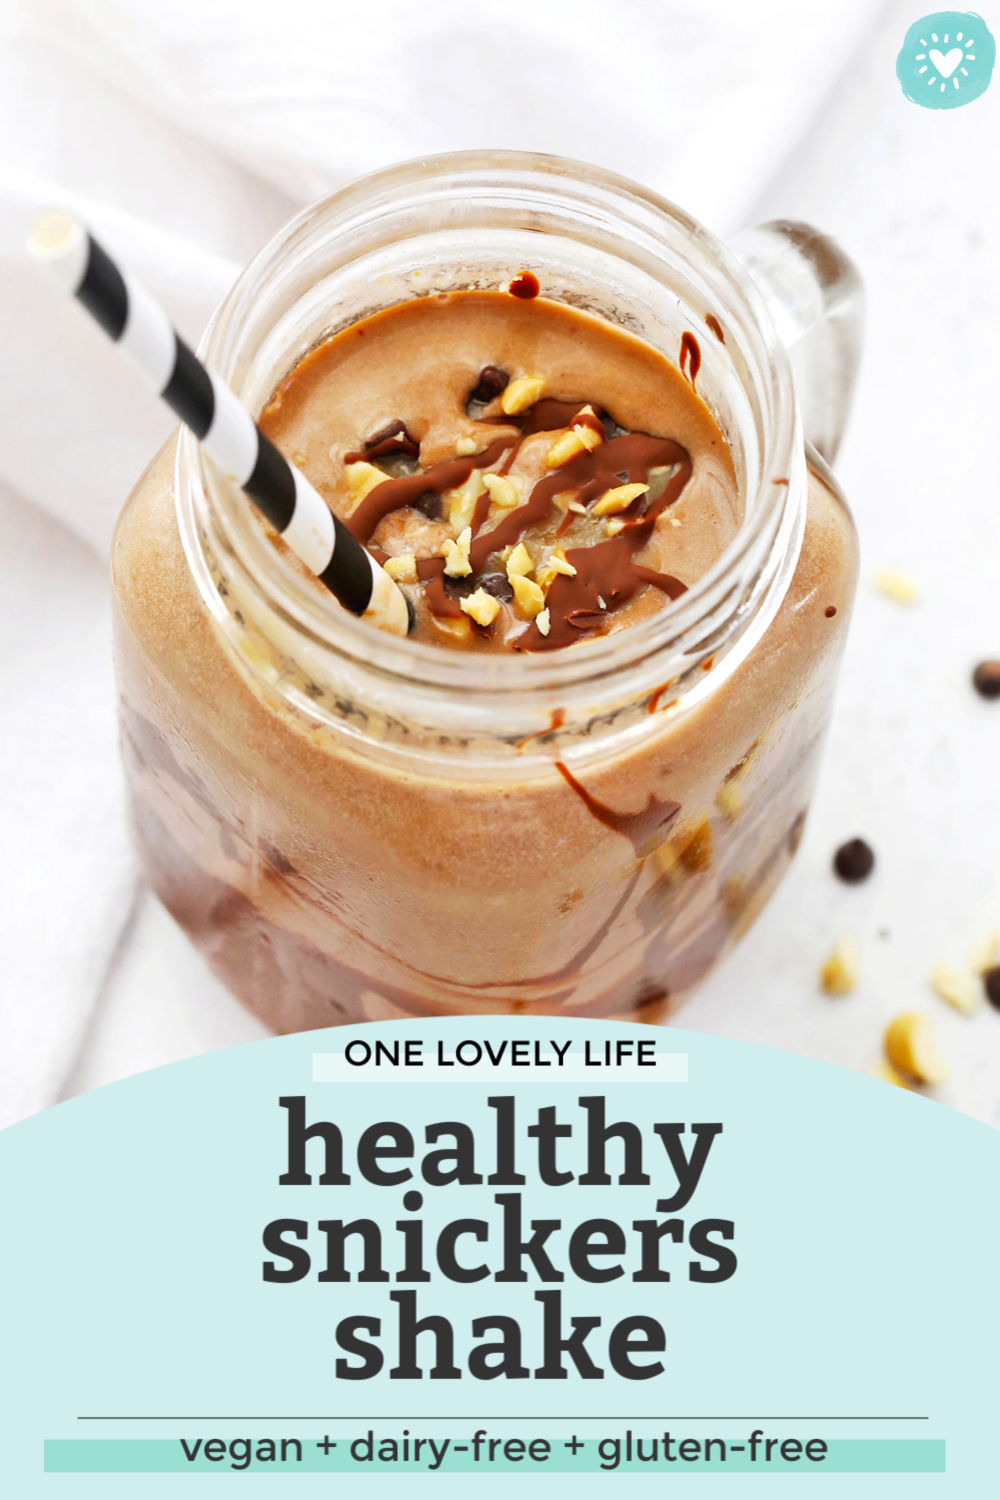 Healthy Snickers Shake from One Lovely Life